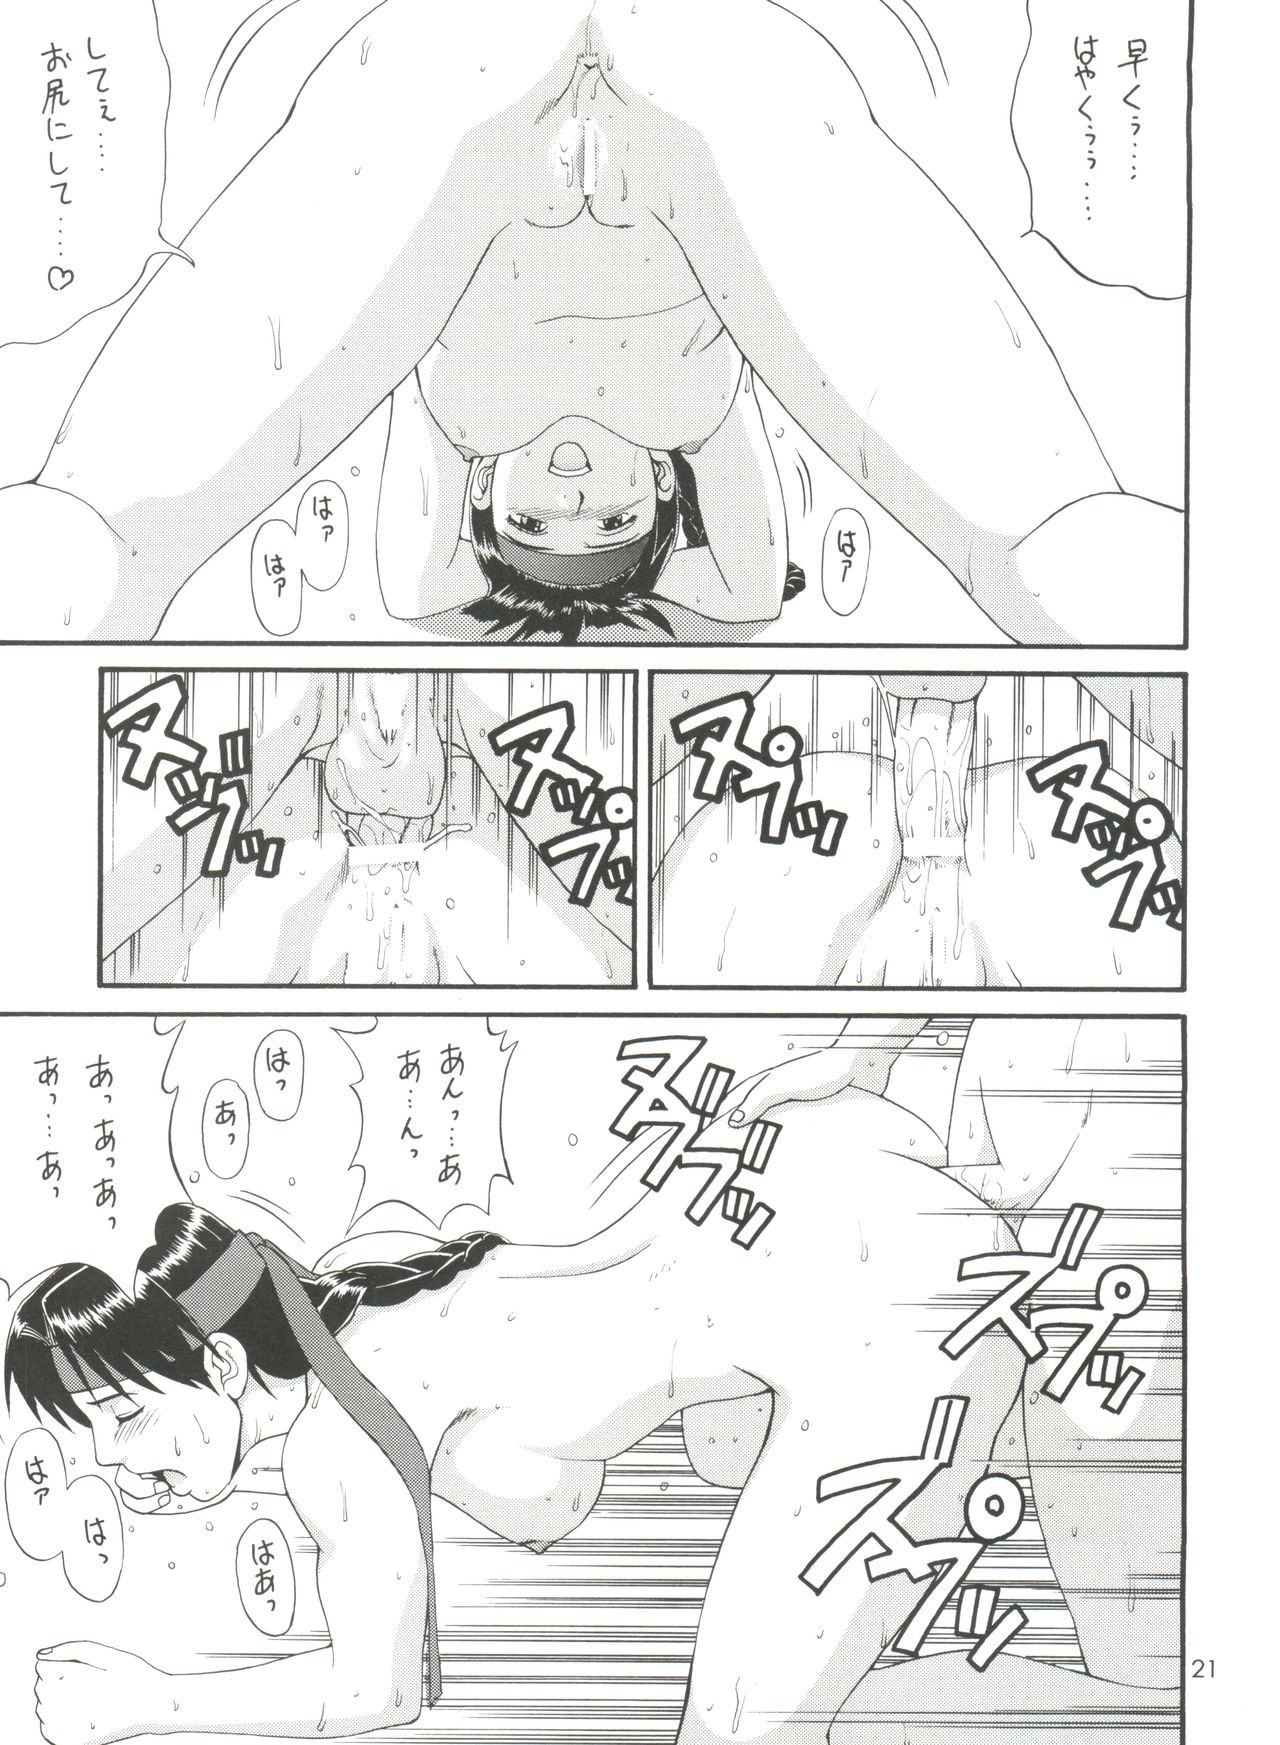 (CR24) [Saigado (Ishoku Dougen)] The Yuri & Friends '98 (King of Fighters) page 20 full